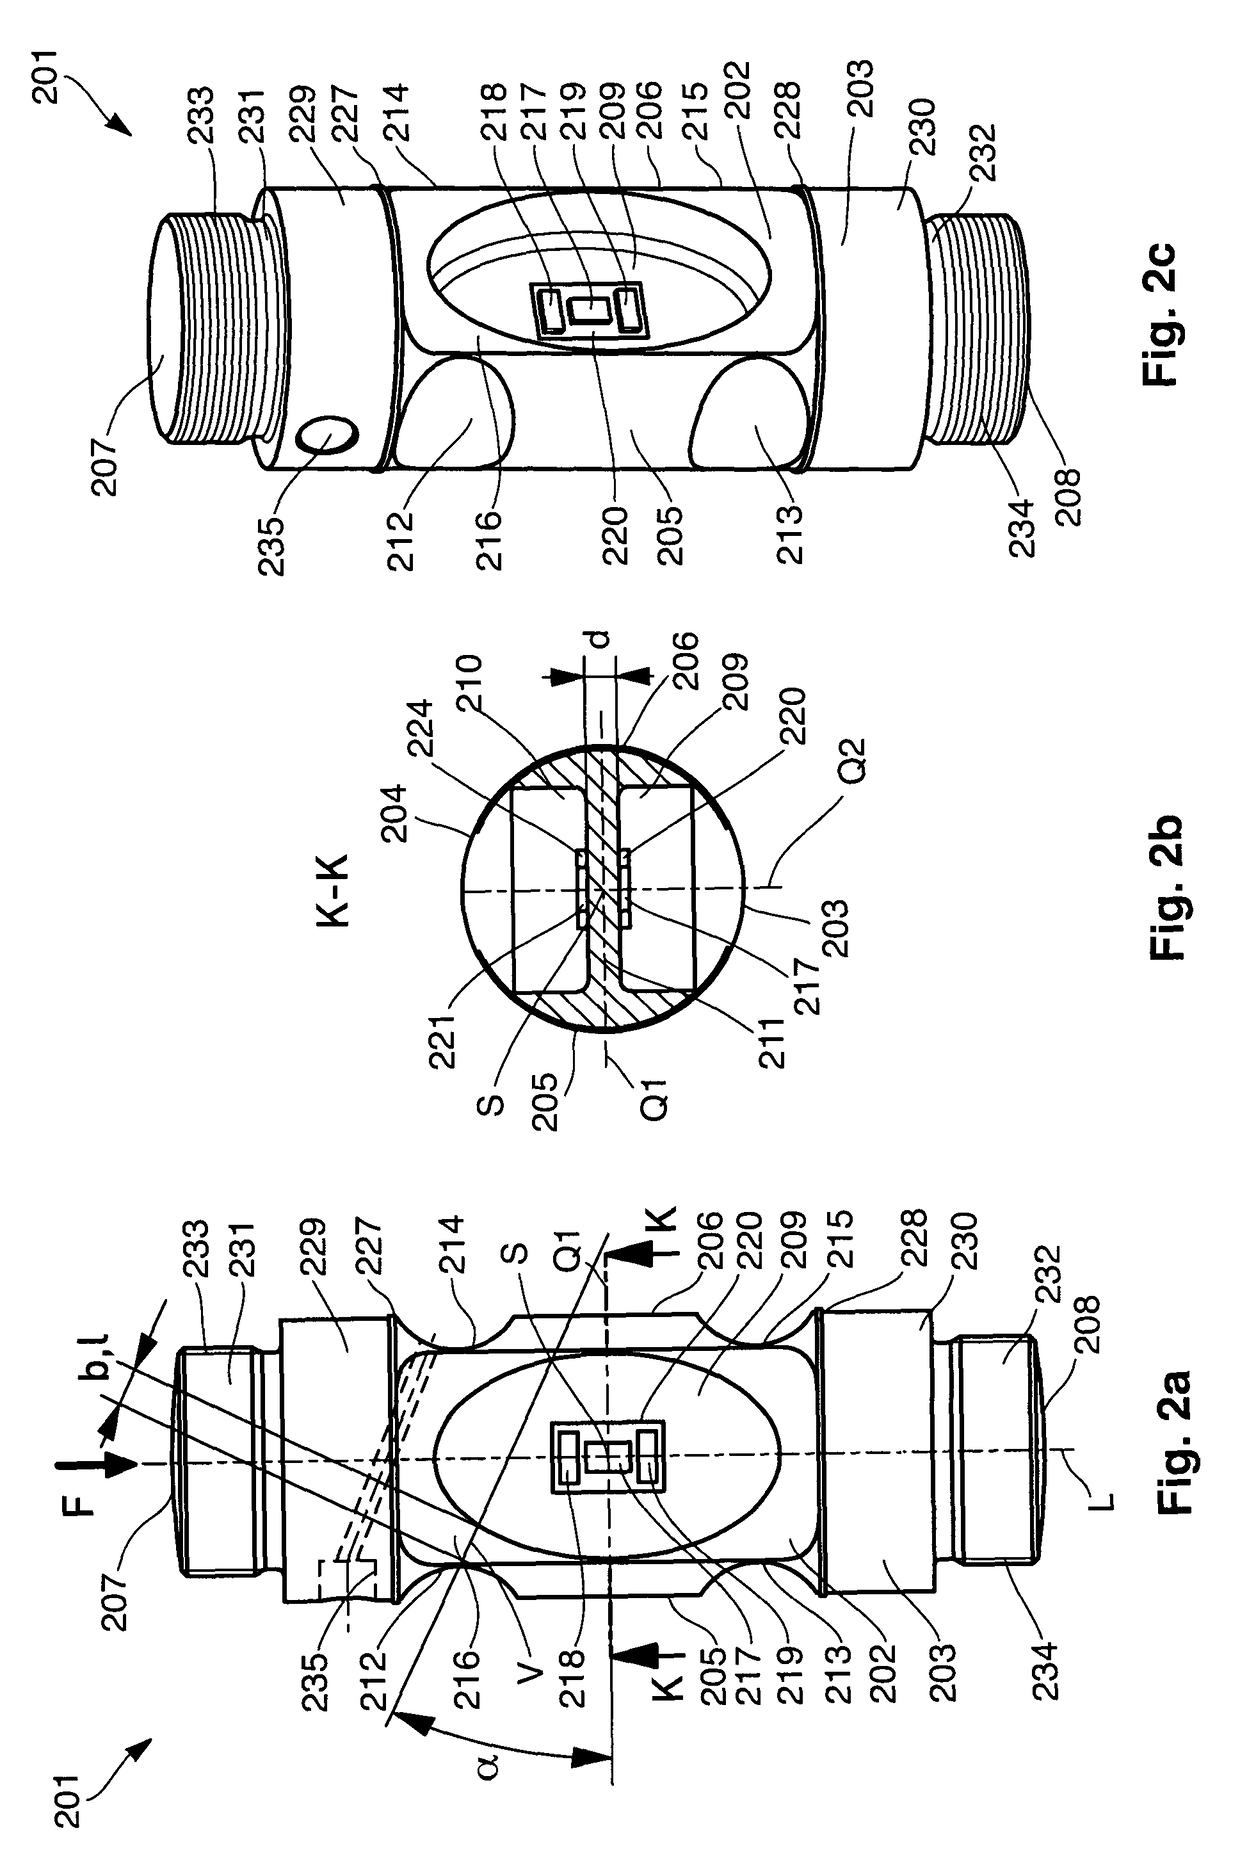 Rod-shaped force transducer with simplified adjustment